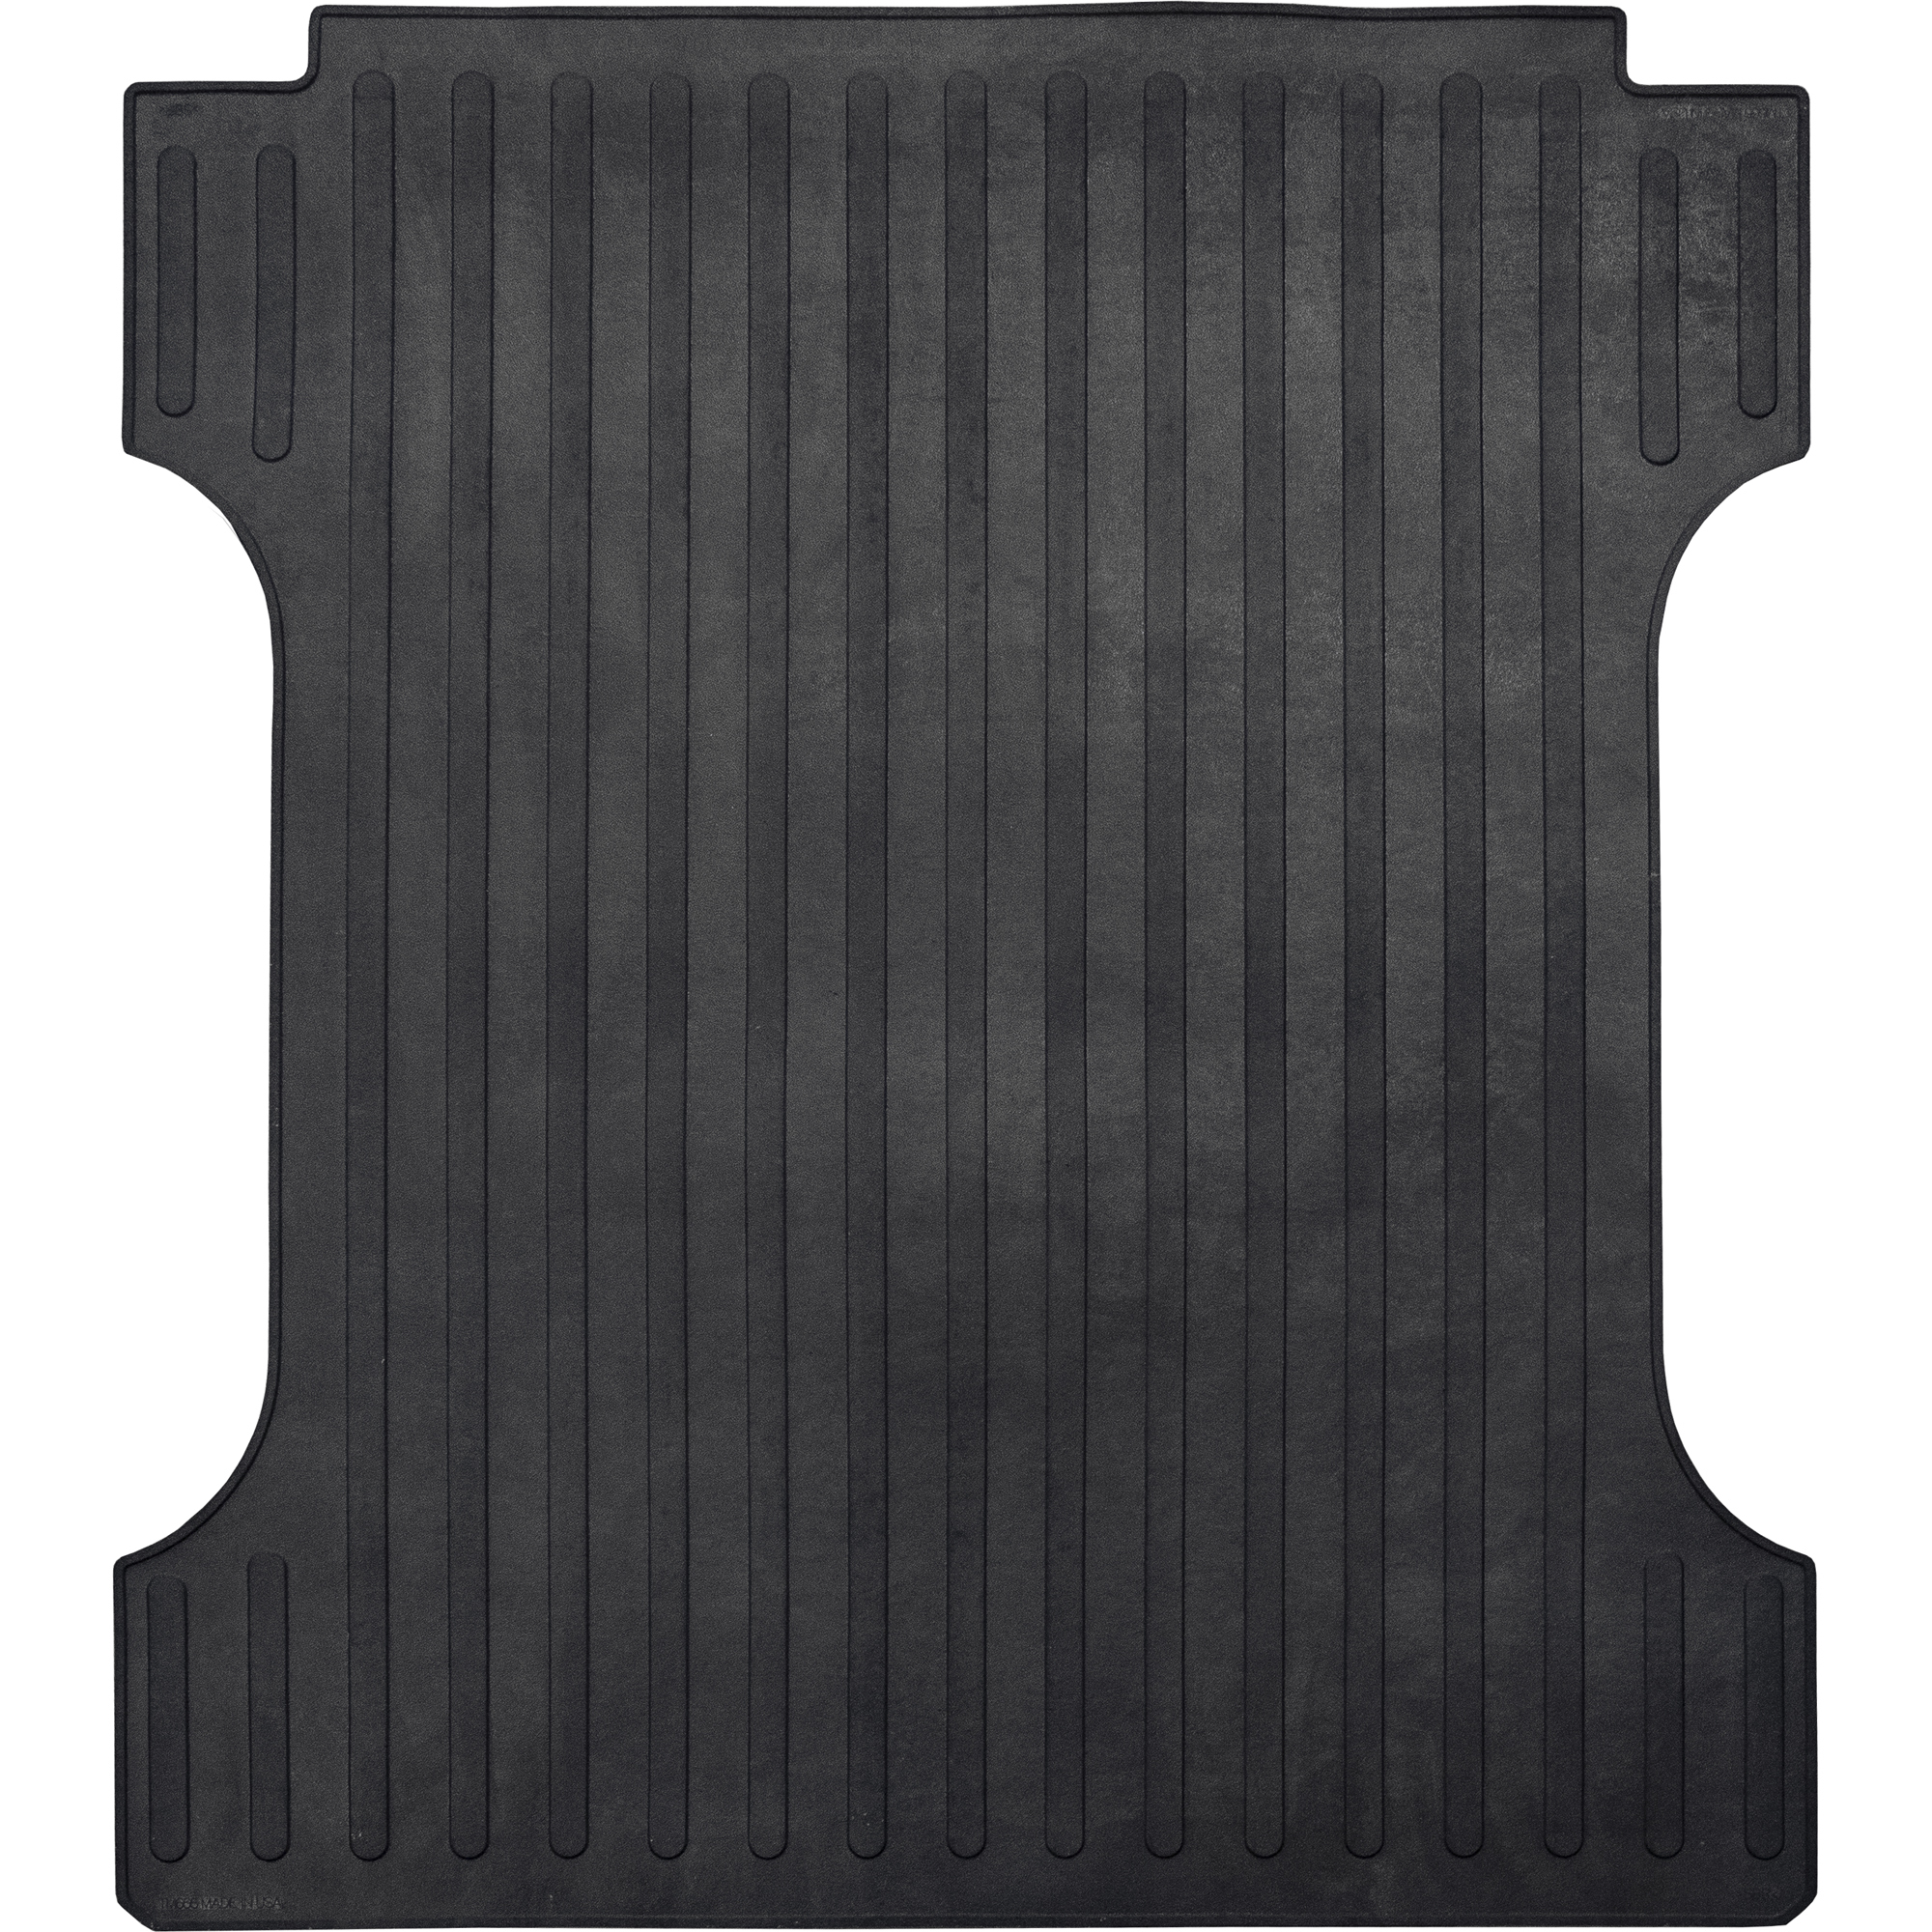 Boomerang Rubber, Dodge RAM 1500-3500 Year 2002-2018 Bed Mat, 8ft. Long, Primary Color Black, Model TM600BAGGED